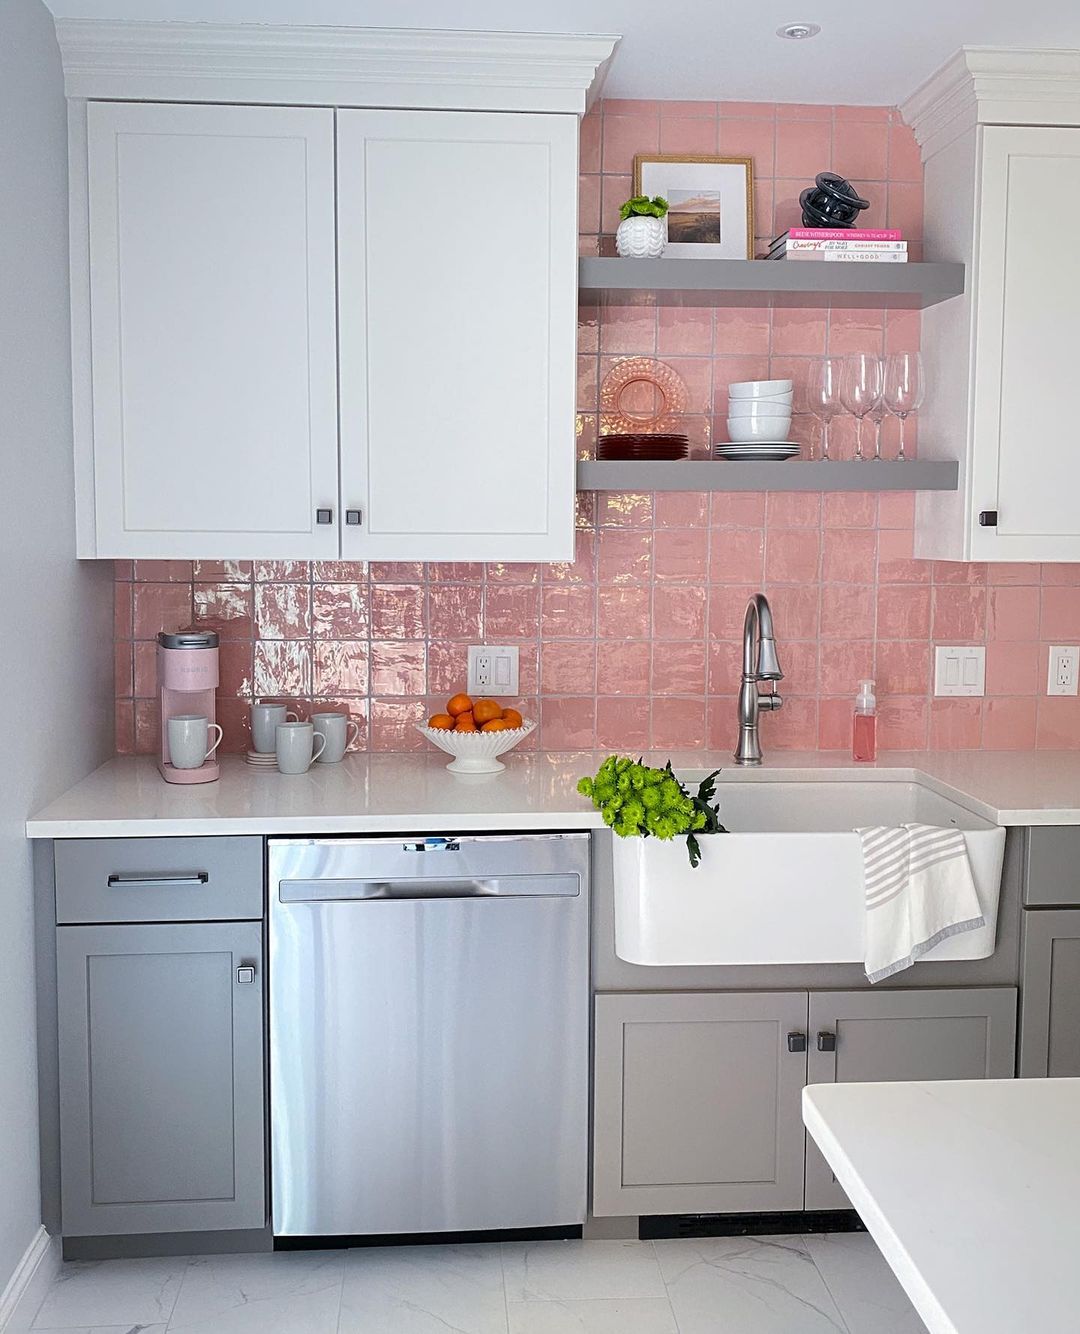 Chic Elegance with Rose-Tinted Tiles